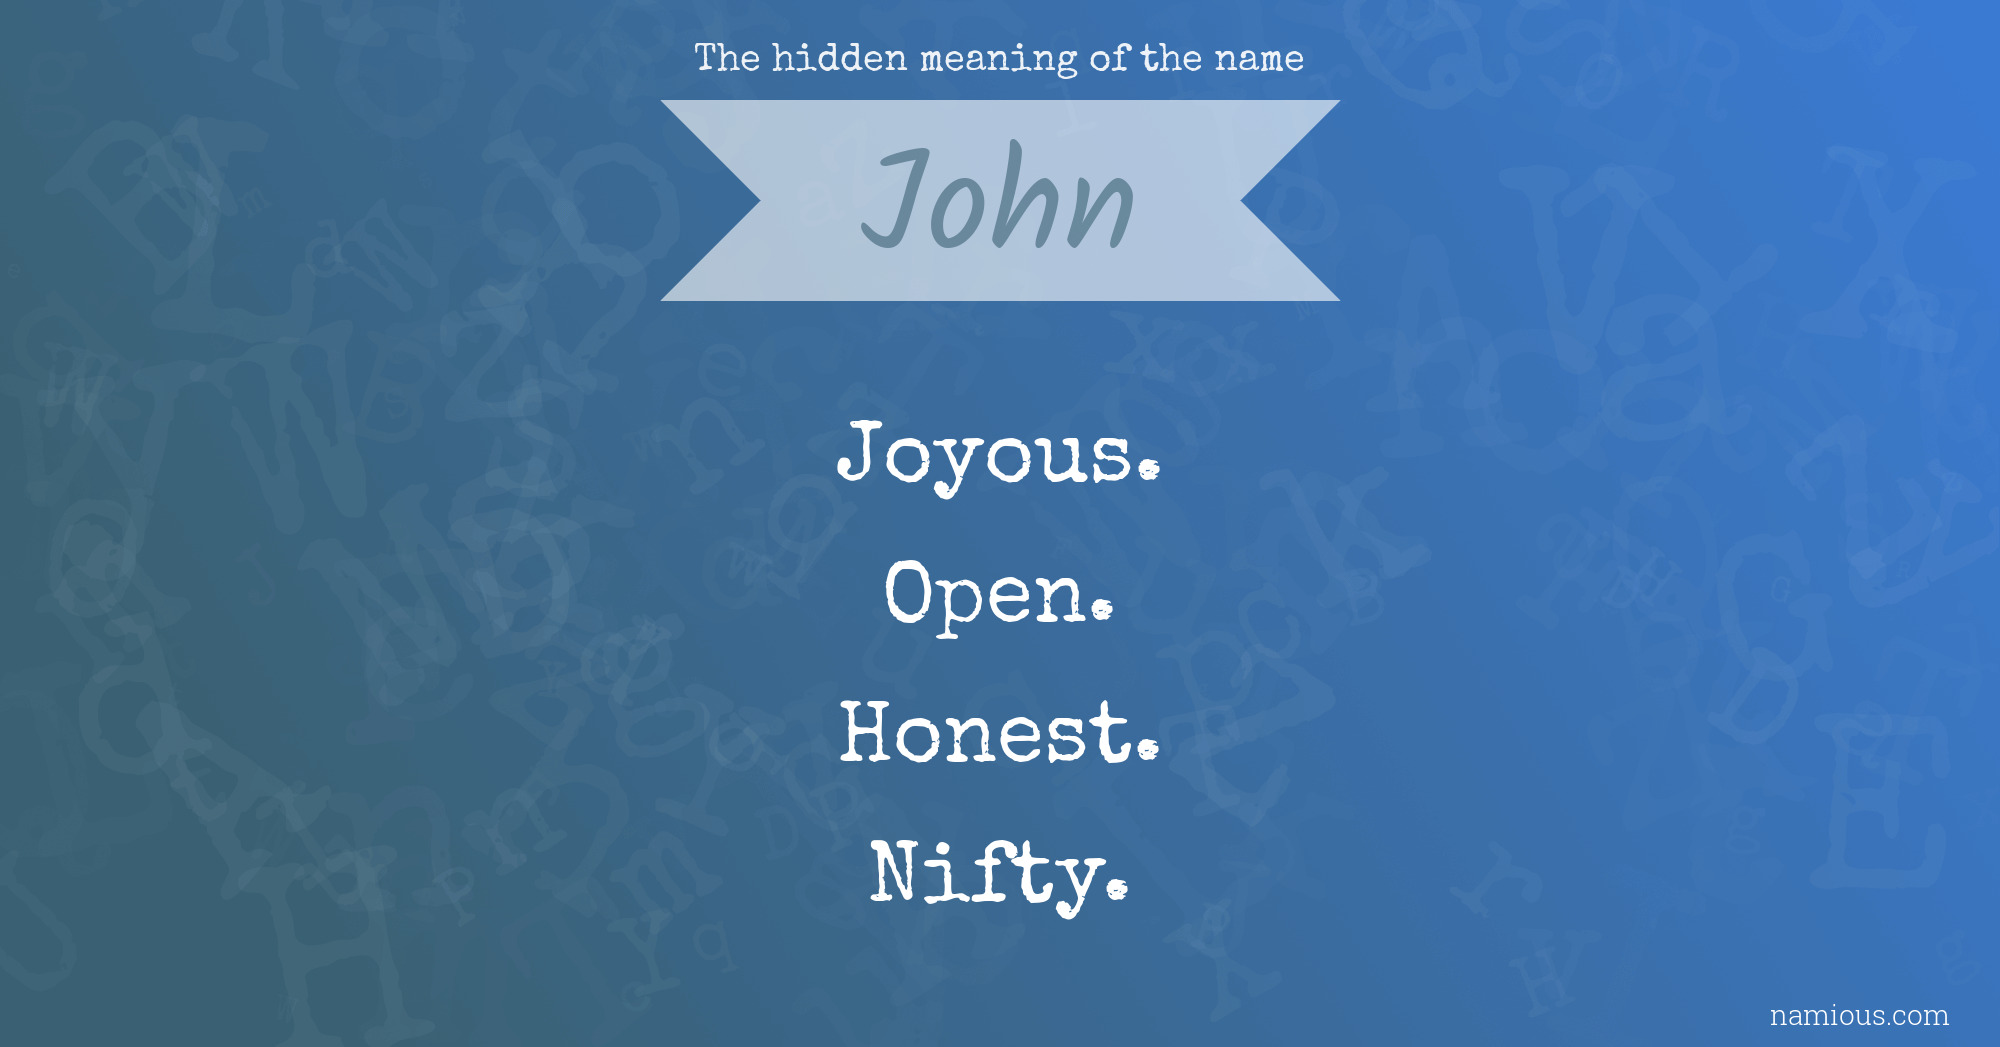 The hidden meaning of the name John